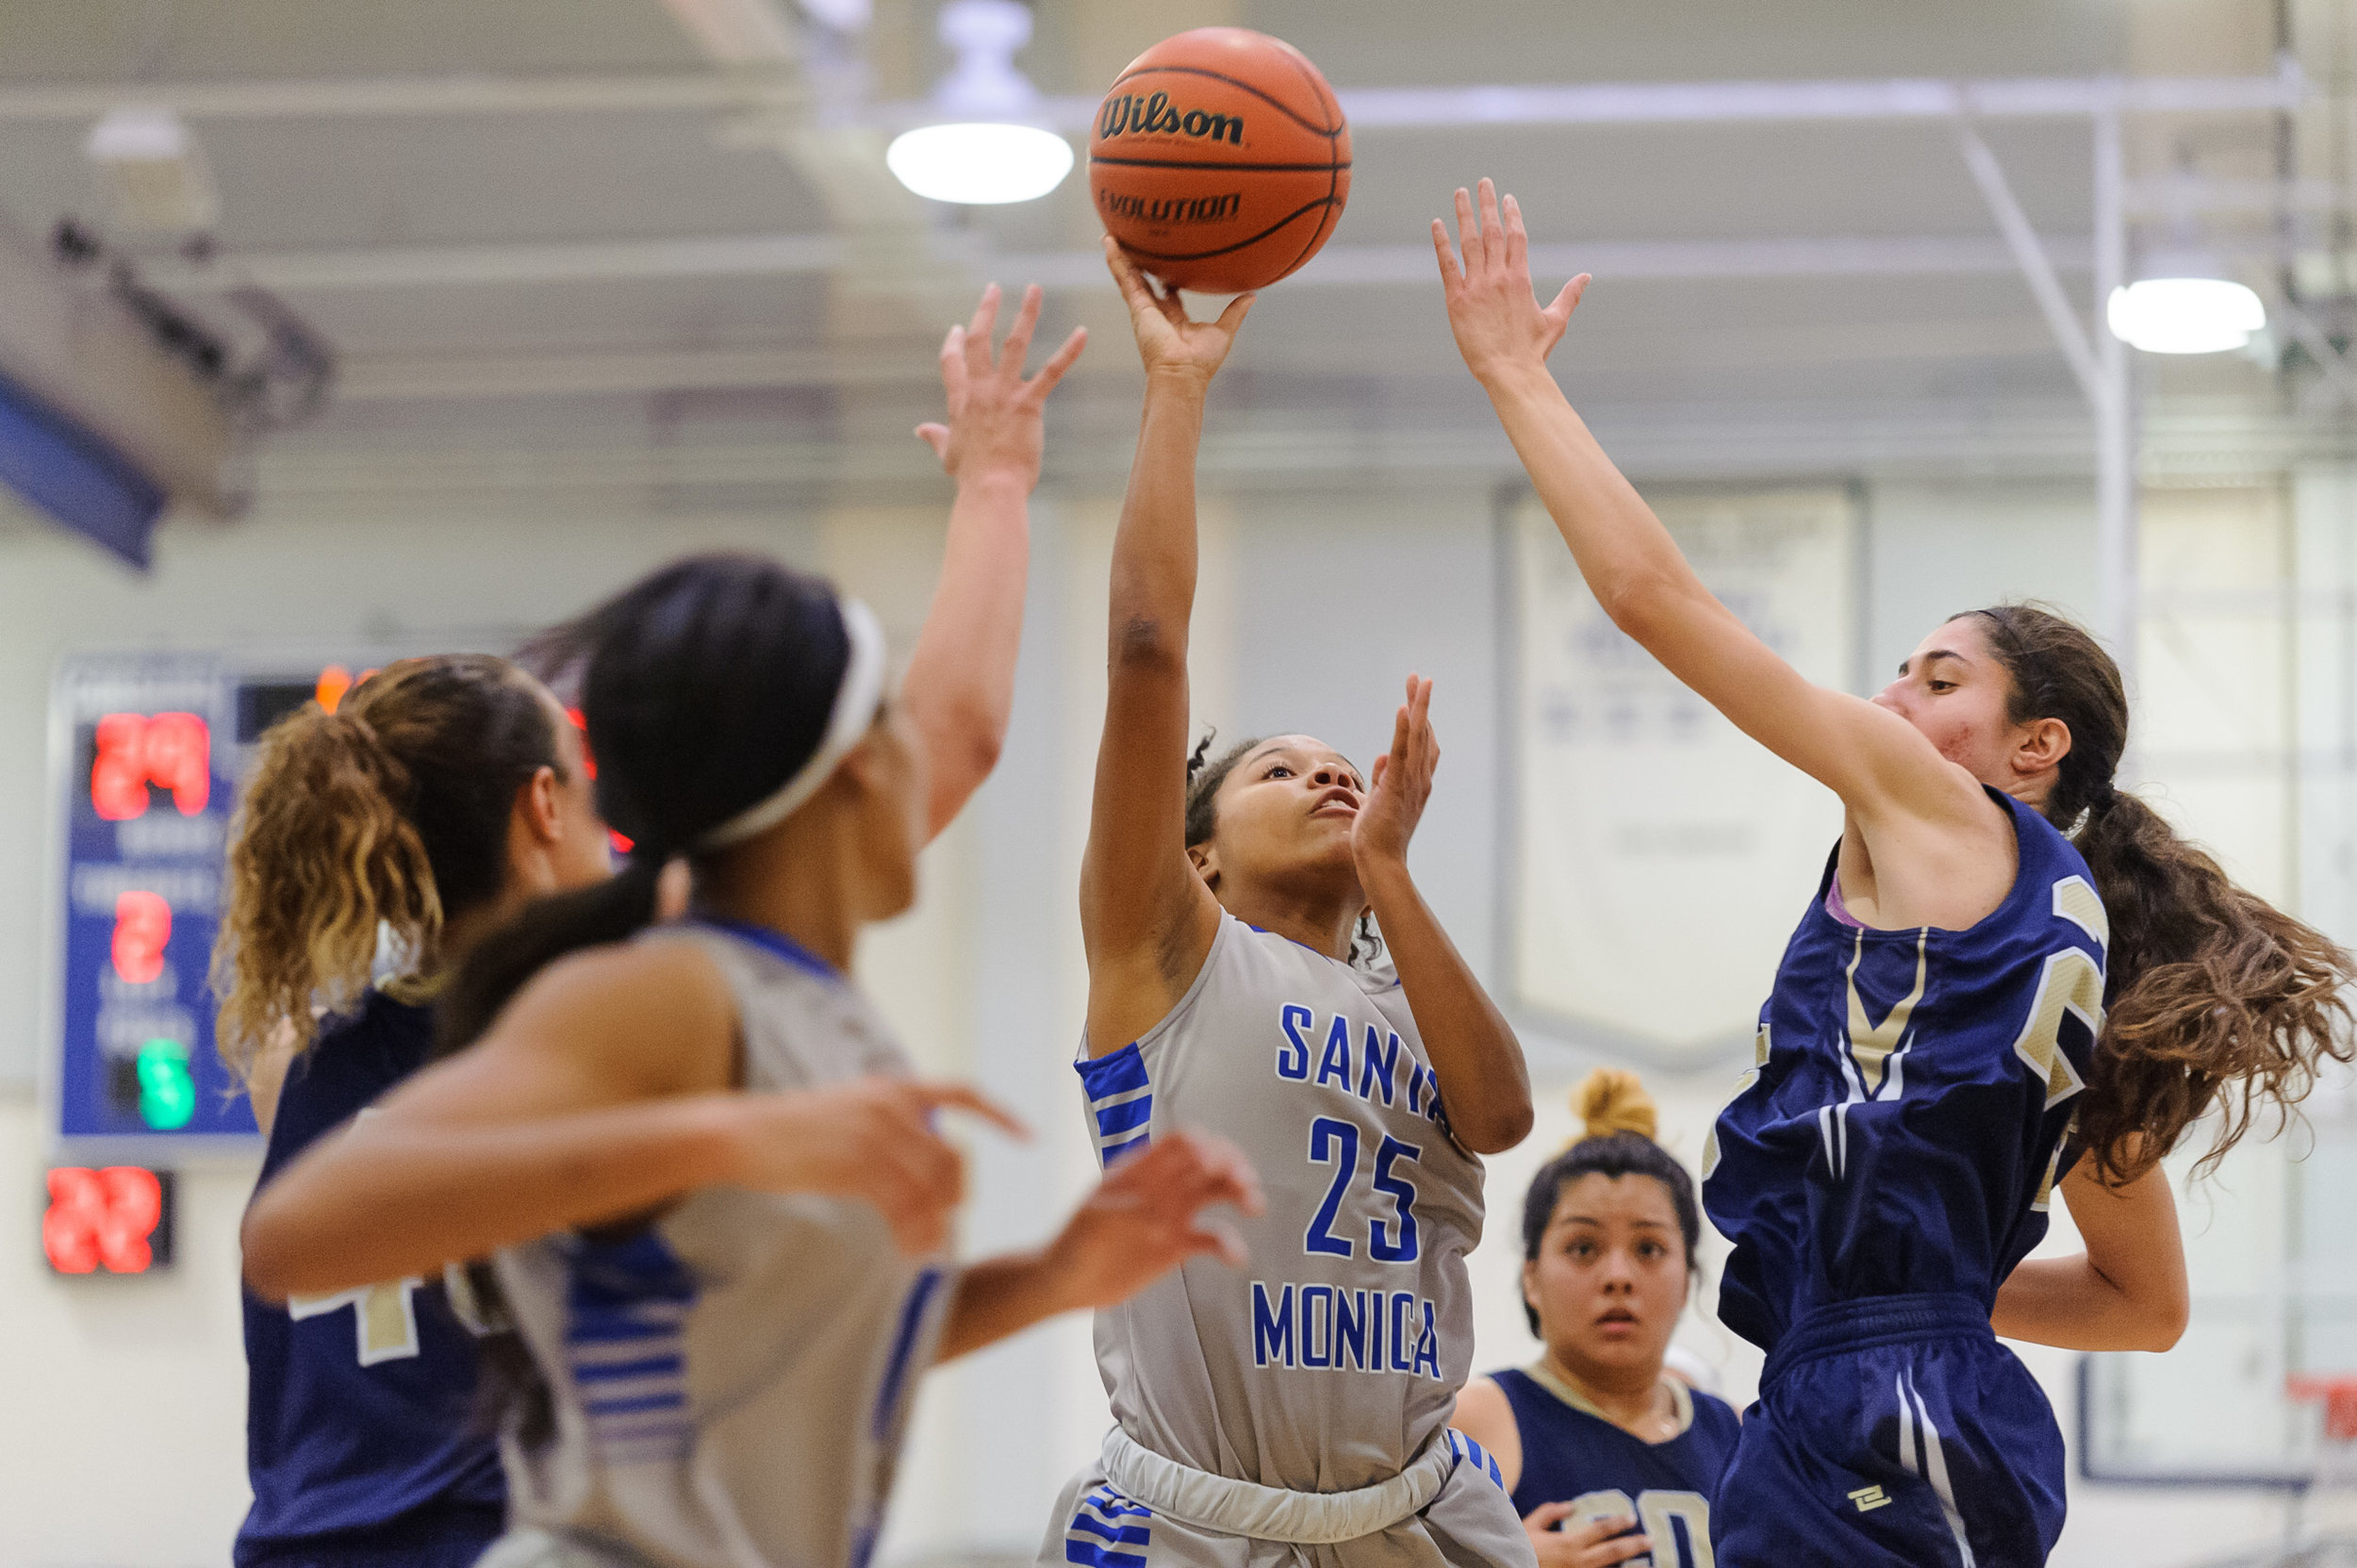  Mija Williams (25) of Santa Monica College shoots a shot in the lane while swarmed by the College of the Canyons defense. The Santa Monica College Corsairs lose the game 108-70 to the College of the Canyons Cougars. The game was held at the SMC Pavi